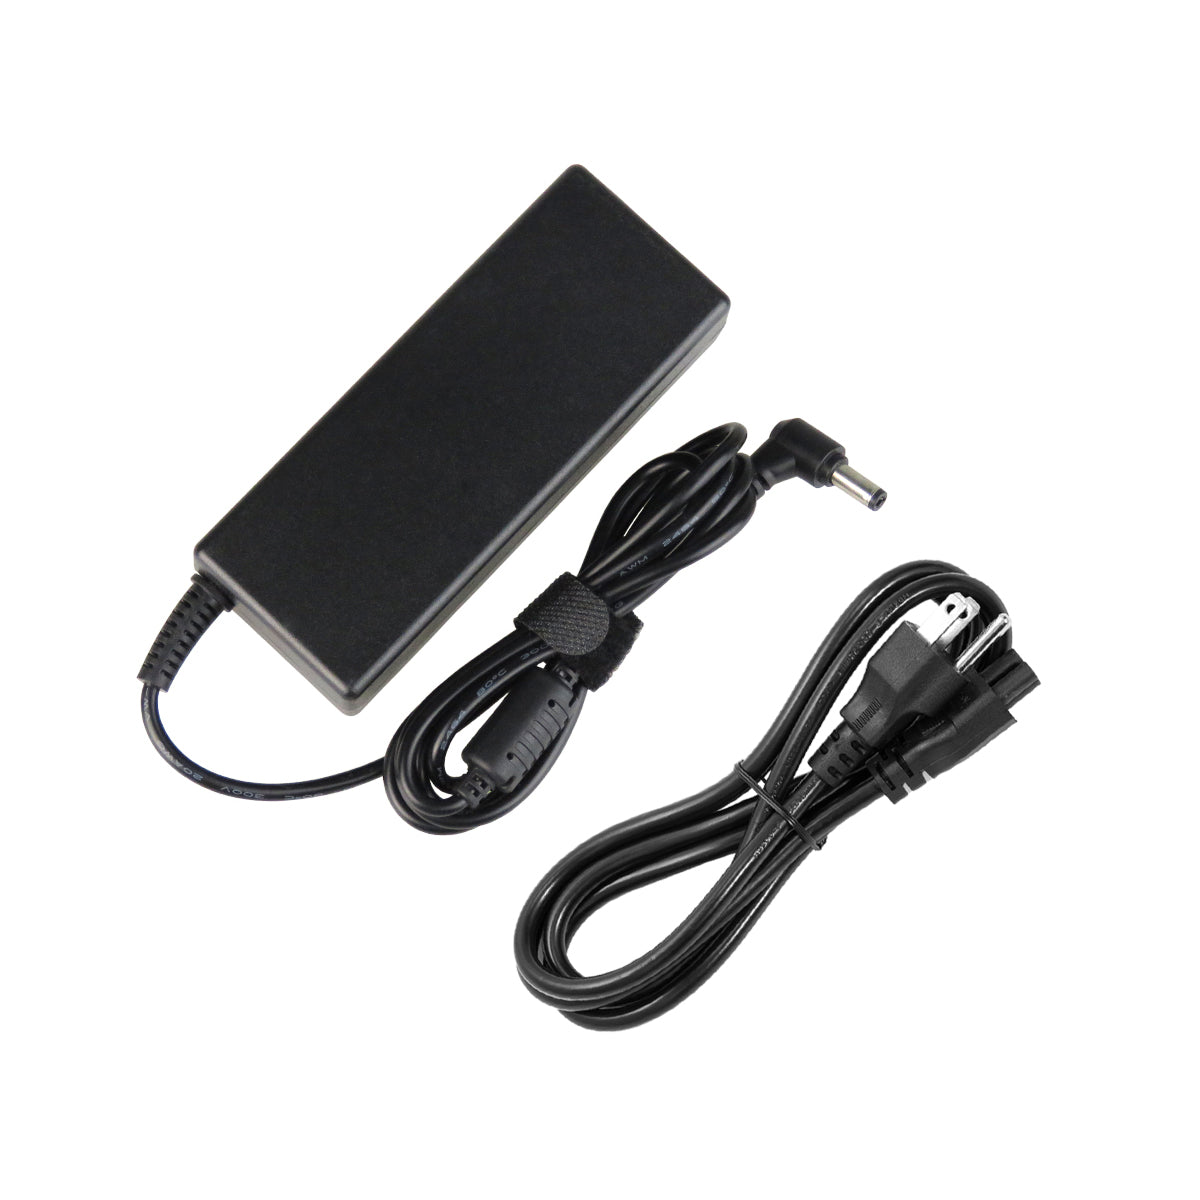 AC Adapter Charger for Lenovo 3000 N500 Notebook.